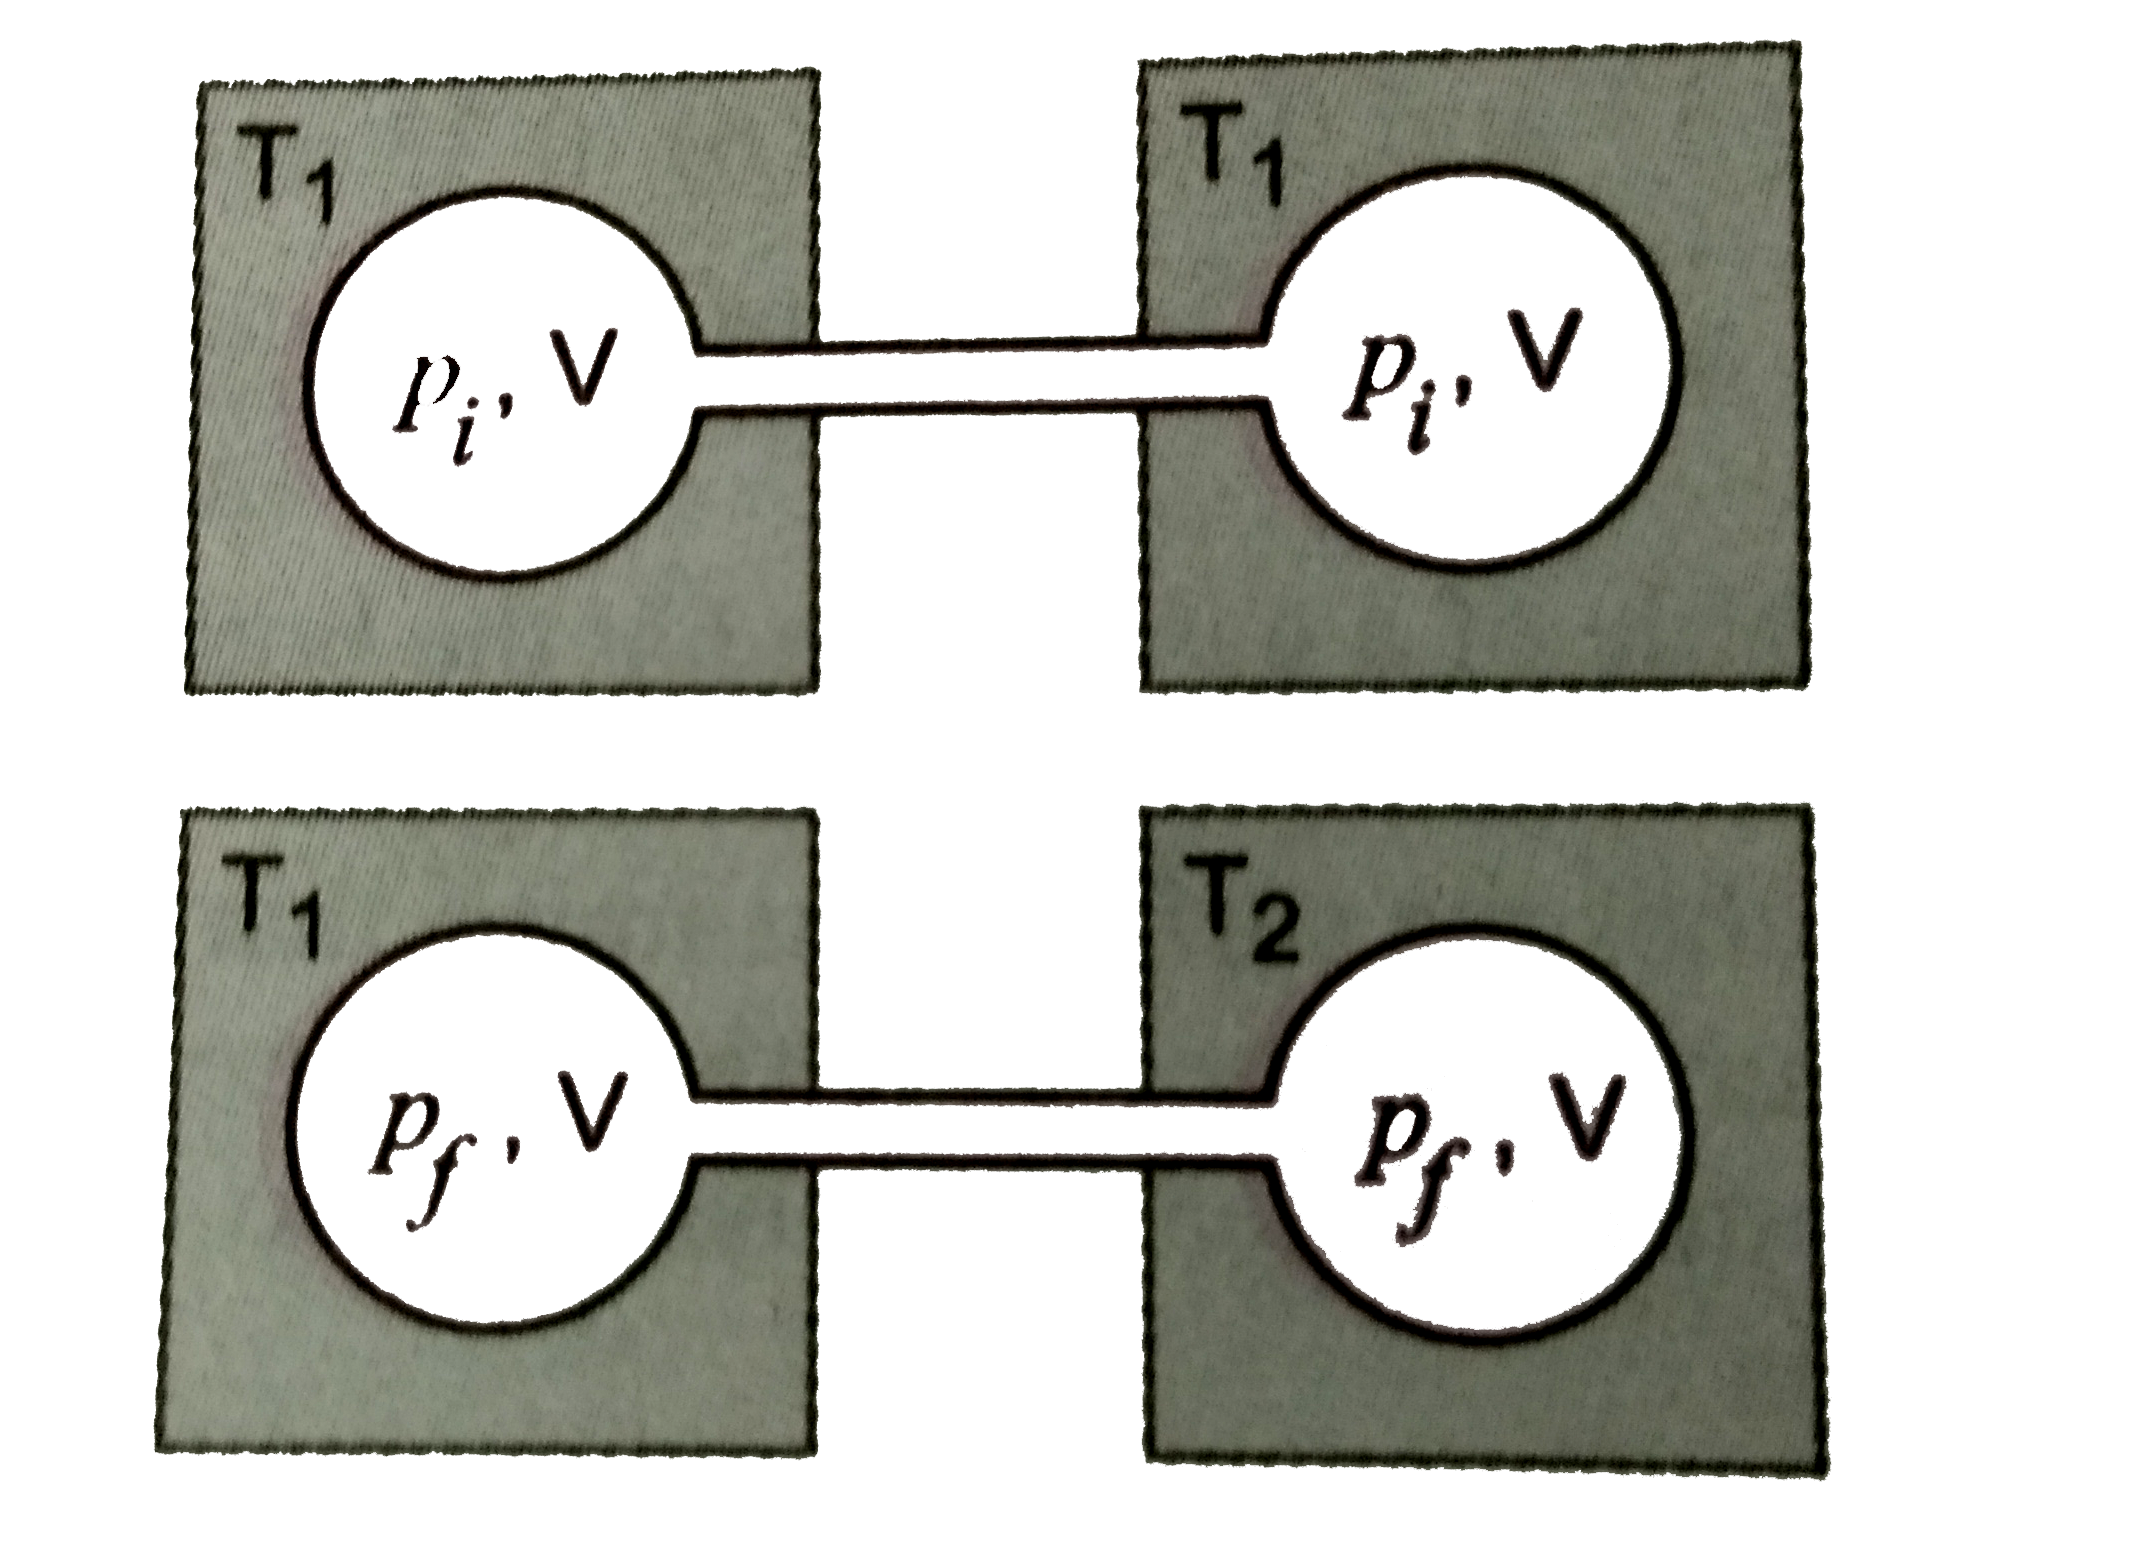 Two closed bulbs of equal volume (V) containing an ideal gas initially at pressure p(i) and temperature T(1) are connected through a narrow tube of negligible volume as shown in the figure below. The temperature of one of the bulbs is then raised to T(2). The final pressure p(f) is